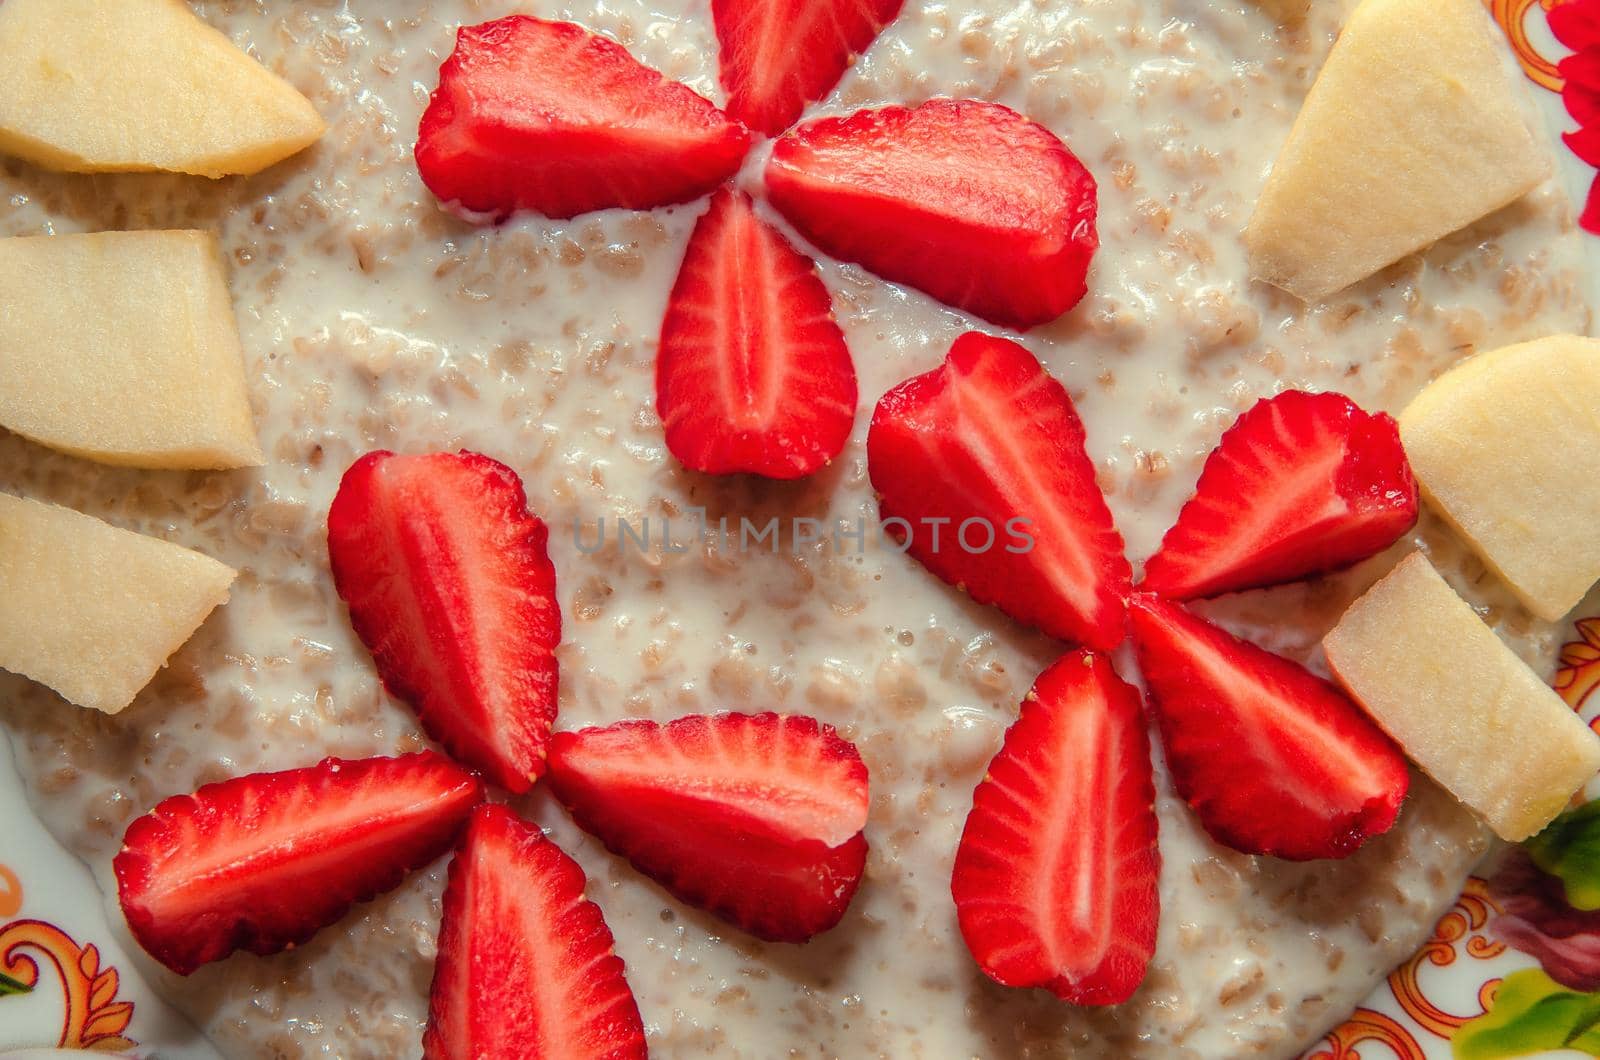 Milk oatmeal on a plate with fruits, strawberries and apples by Sergey